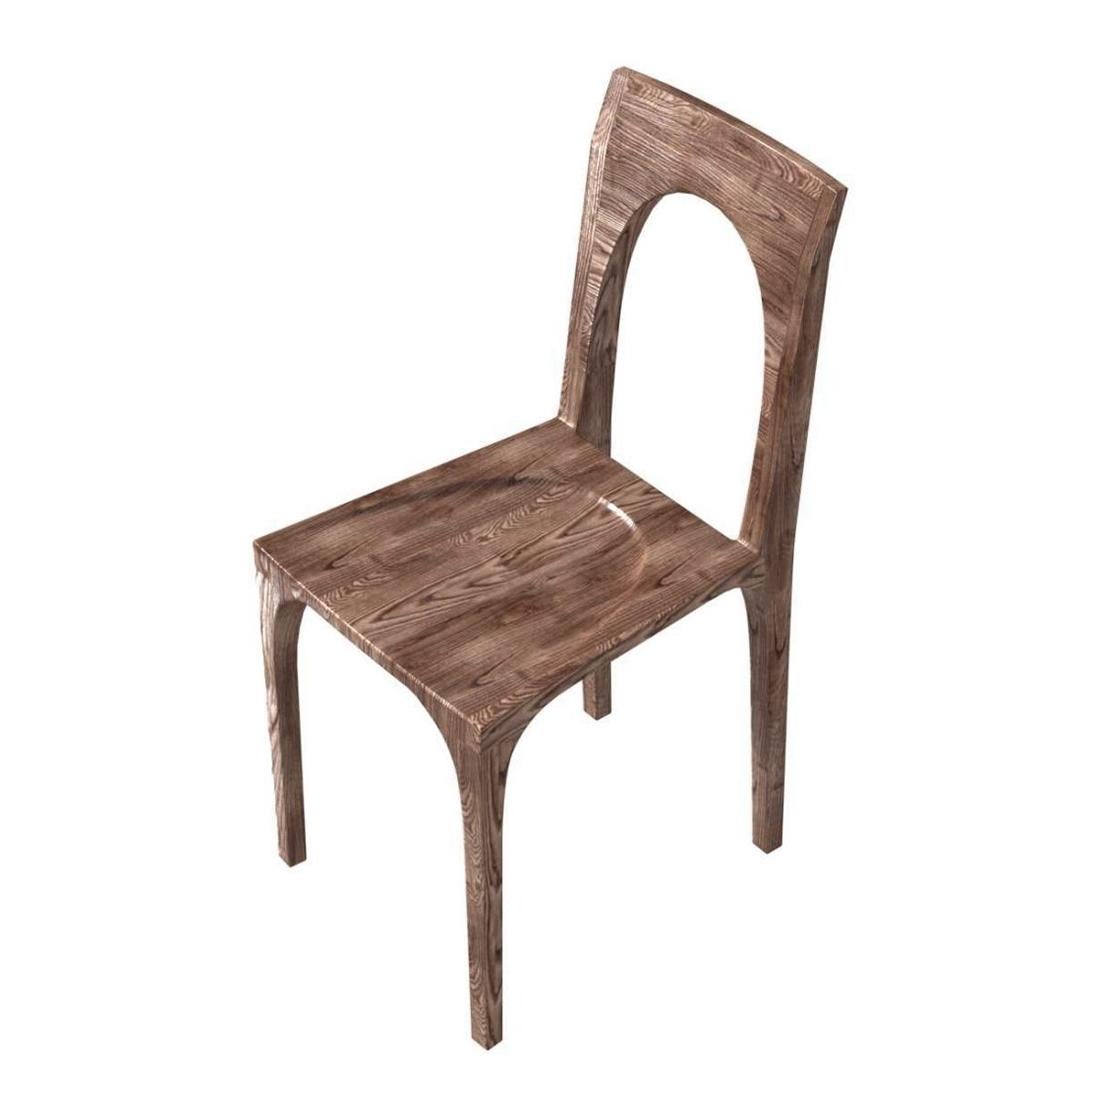 Chair Plum dining with all structure in 
solid ash in walnut stained finish.